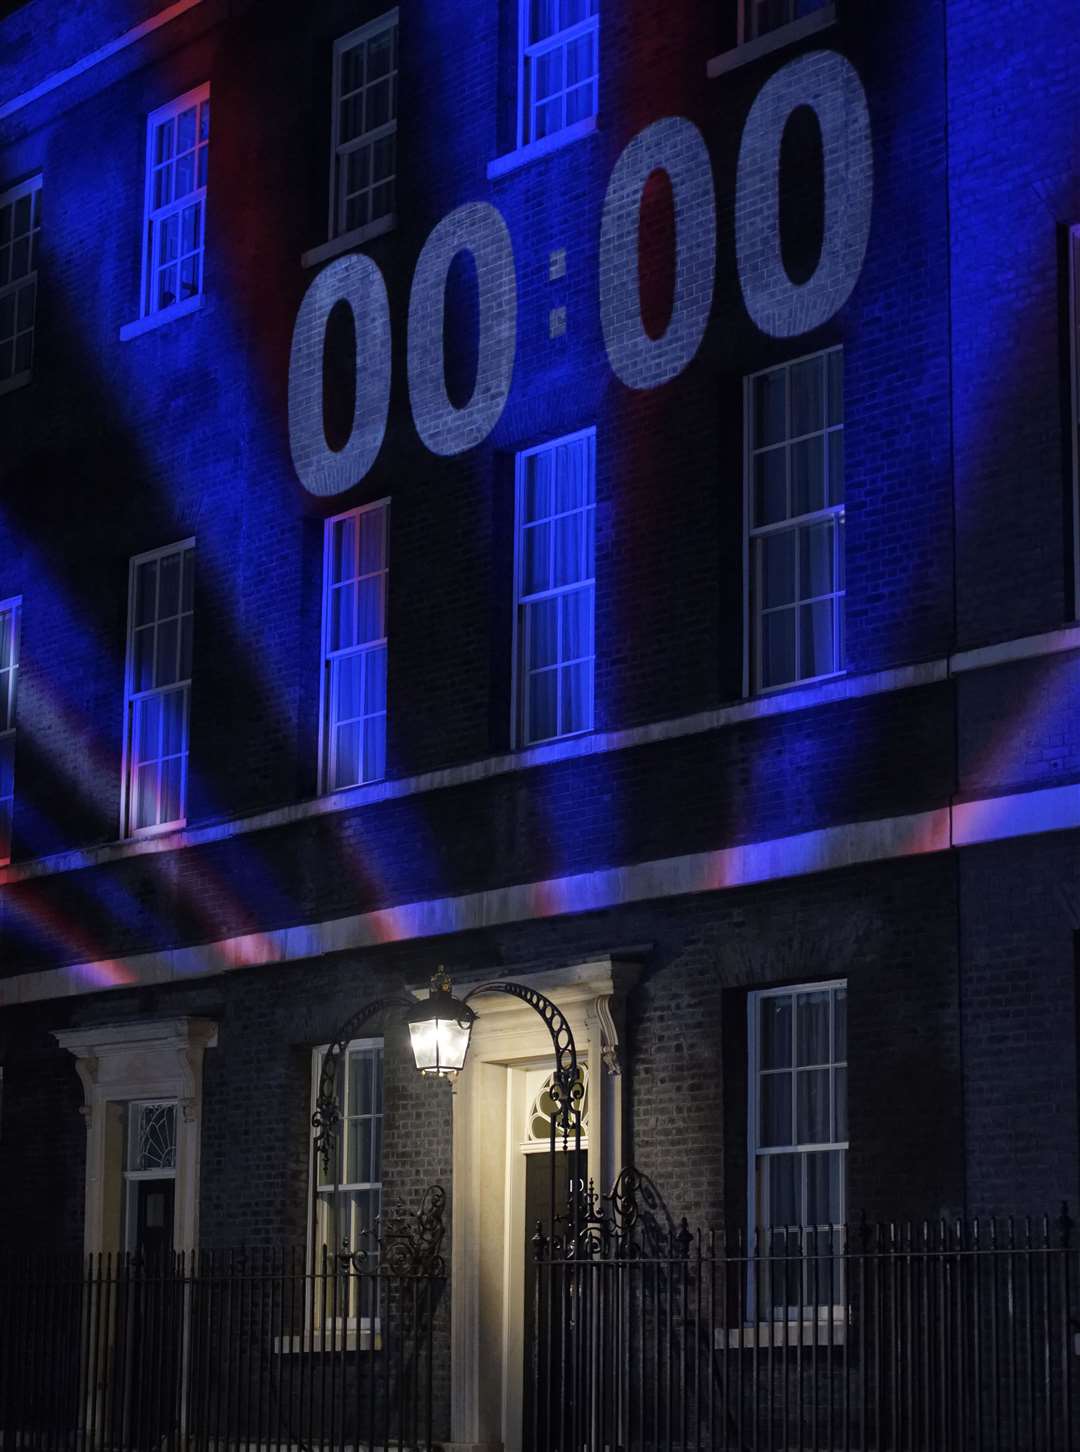 Brexit countdown on Downing Sreet, London. Picture: Paul Sanwell/OP Photographic